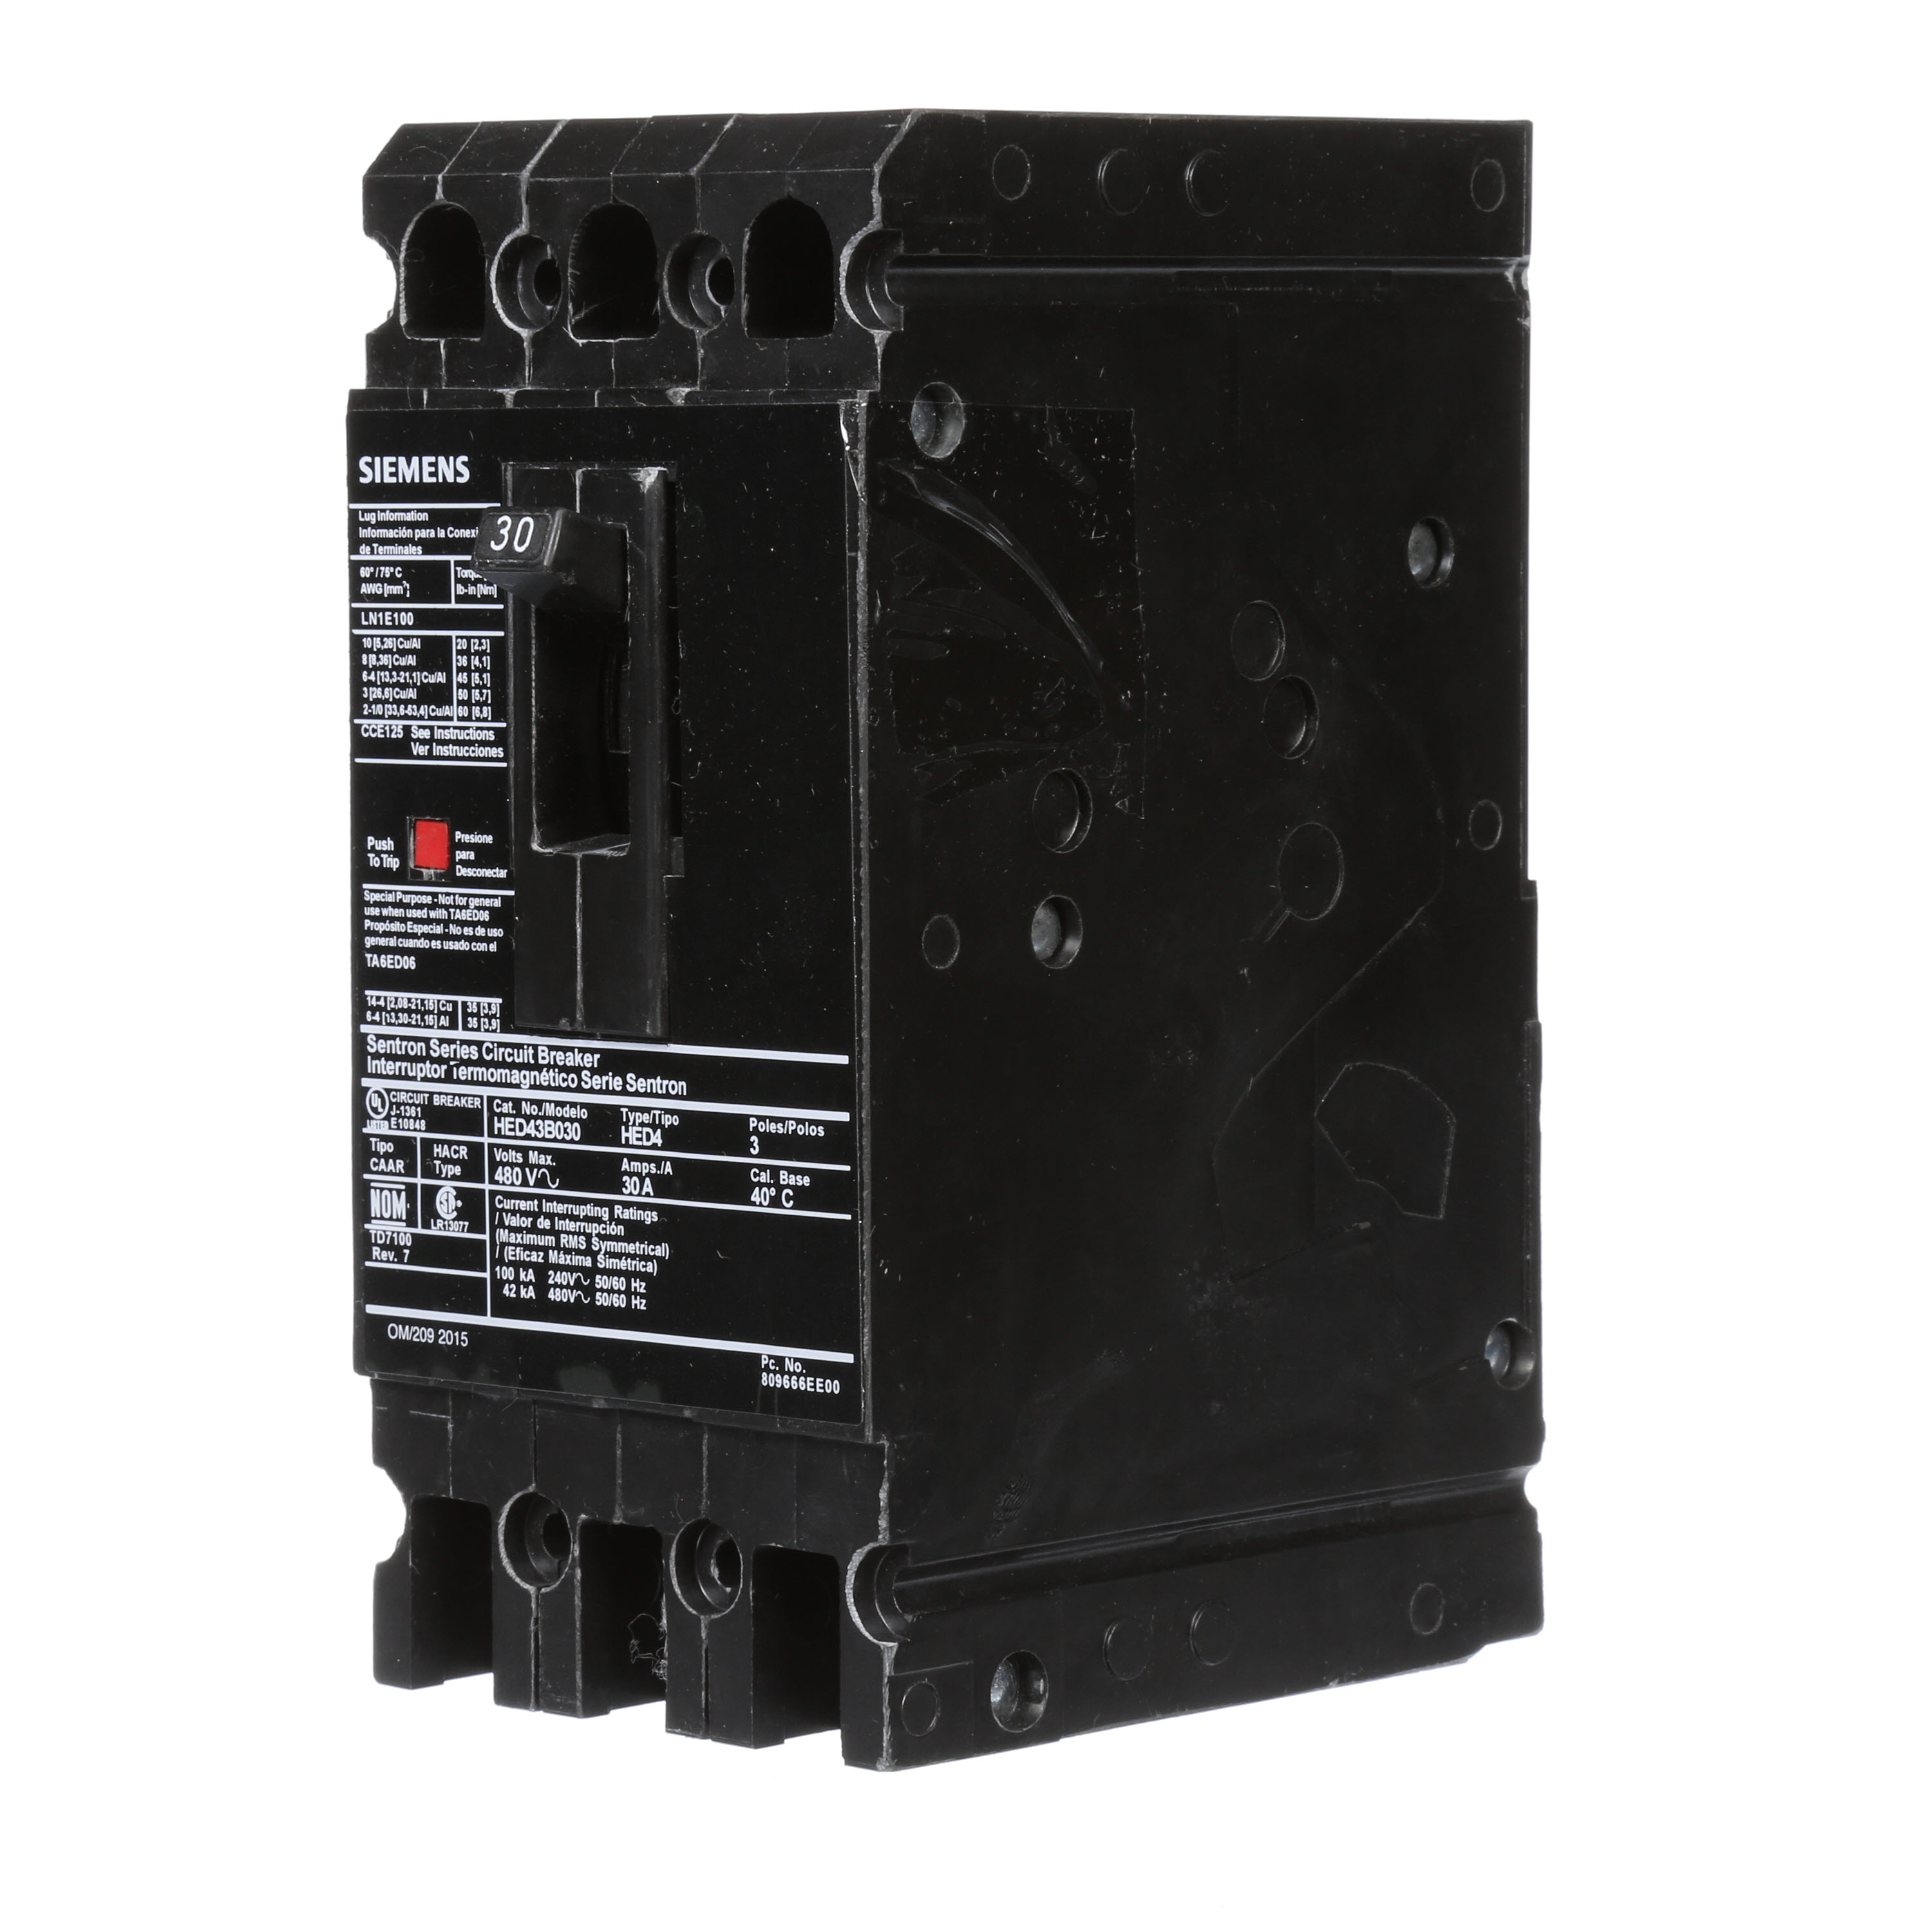 SIEMENS LOW VOLTAGE SENTRON MOLDED CASE CIRCUIT BREAKER WITH THERMAL - MAGNETICTRIP UNIT. STANDARD 40 DEG C BREAKER ED FRAME WITH HIGH BREAKING CAPACITY. 30A 3-POLE (42KAIC AT 480V). NON-INTERCHANGEABLE TRIP UNIT. SPECIAL FEATURES LOAD LUGS ONLY (LN1E100) WIRE RANGE 10 - 1/0AWG (CU/AL). DIMENSIONS (W x H x D) IN 3.00x 6.4 x 3.92.